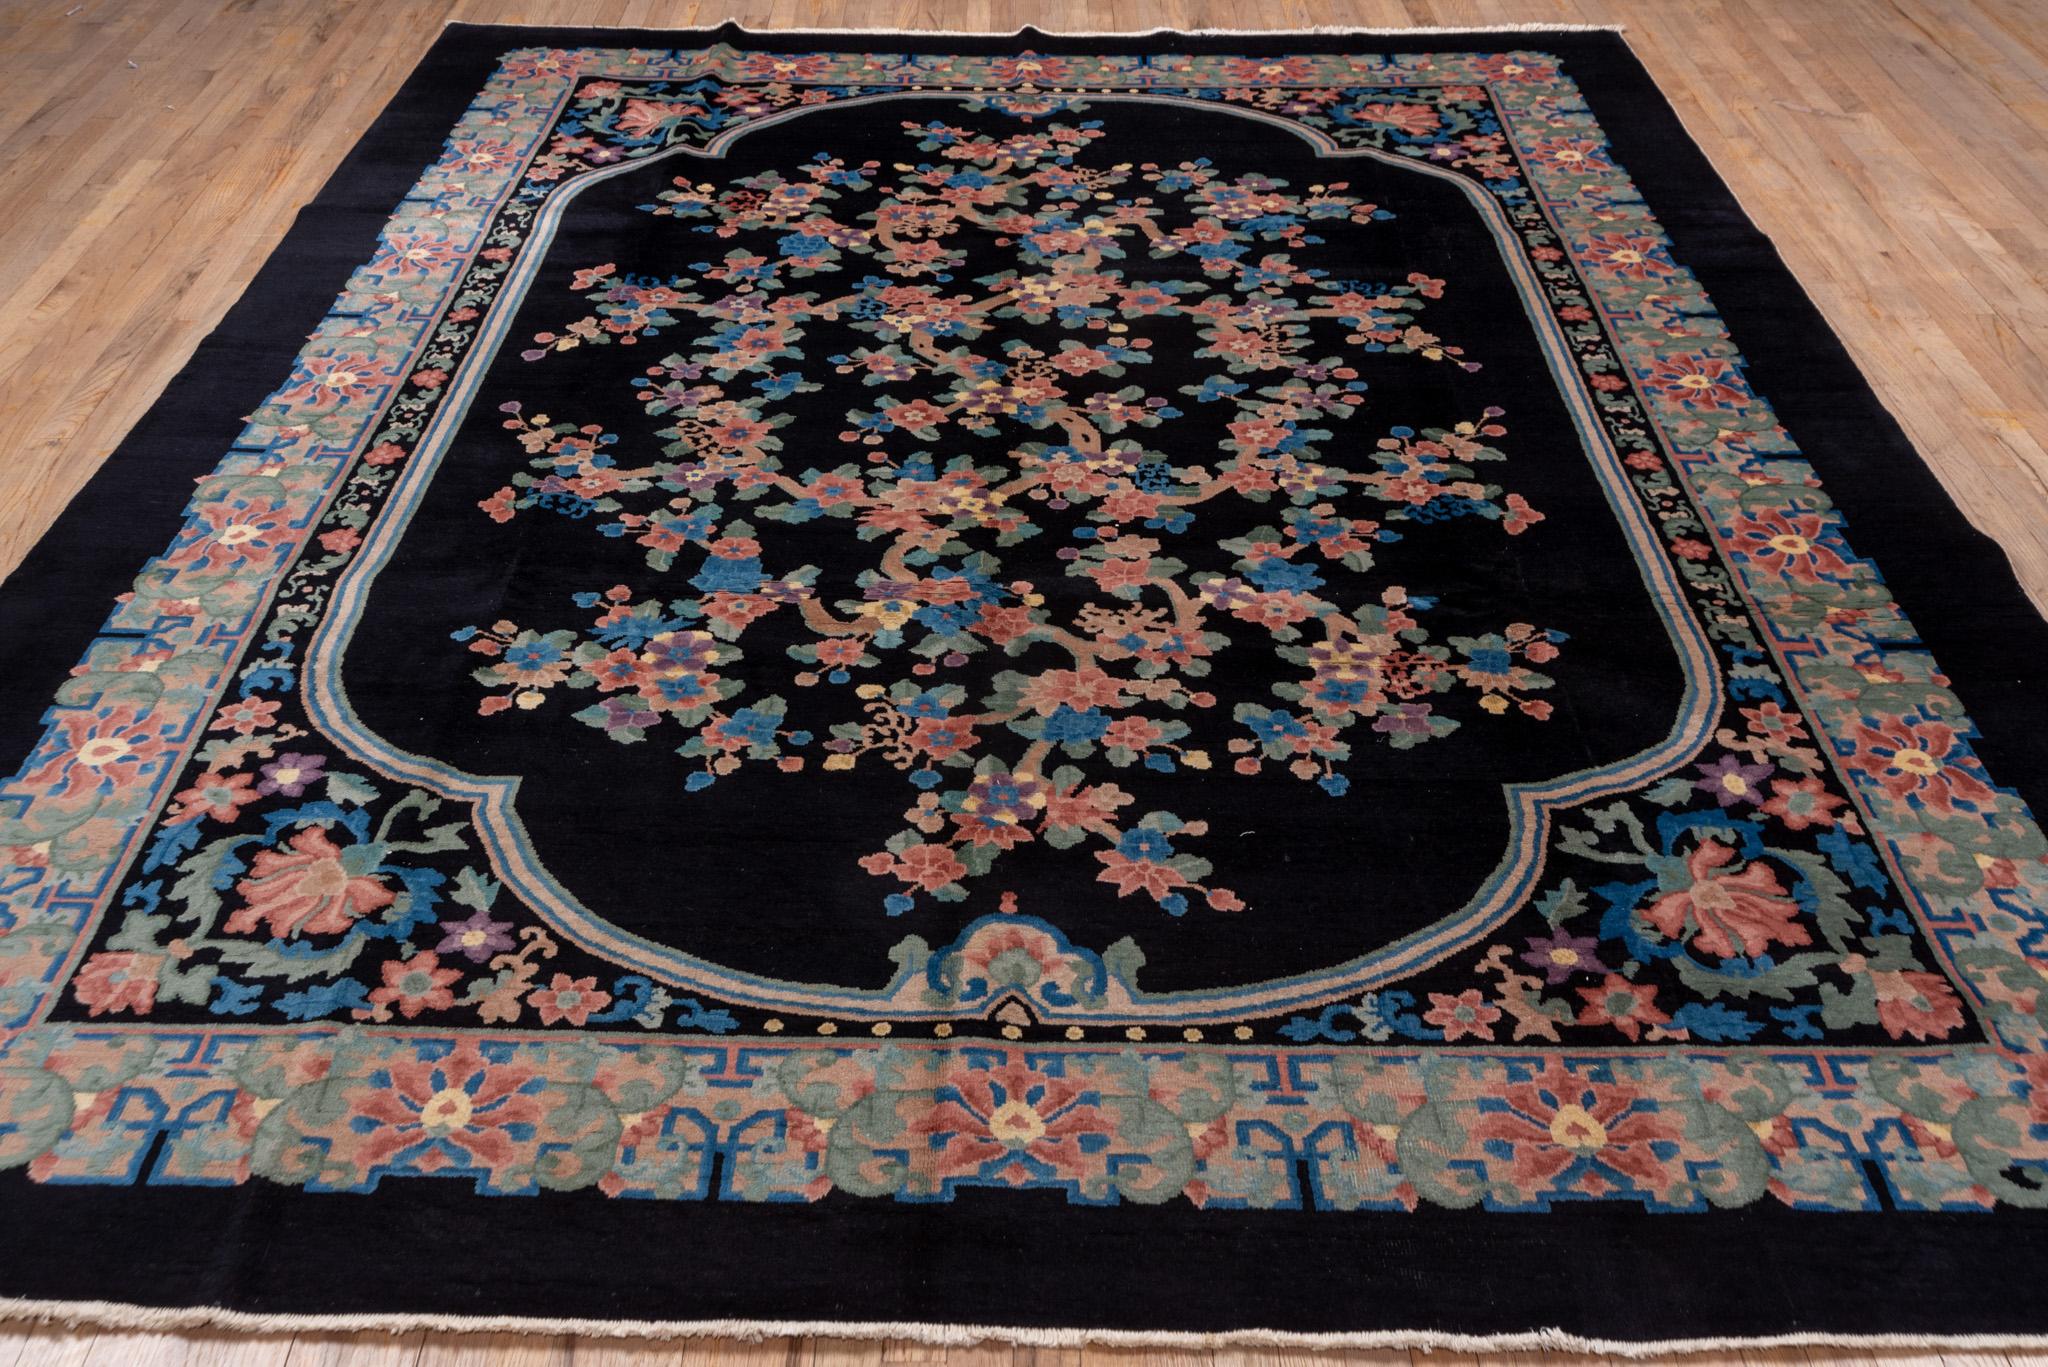 A Chinese Art Deco Rug circa 1930. Hand knotted. Made of 100% Wool yarn. 